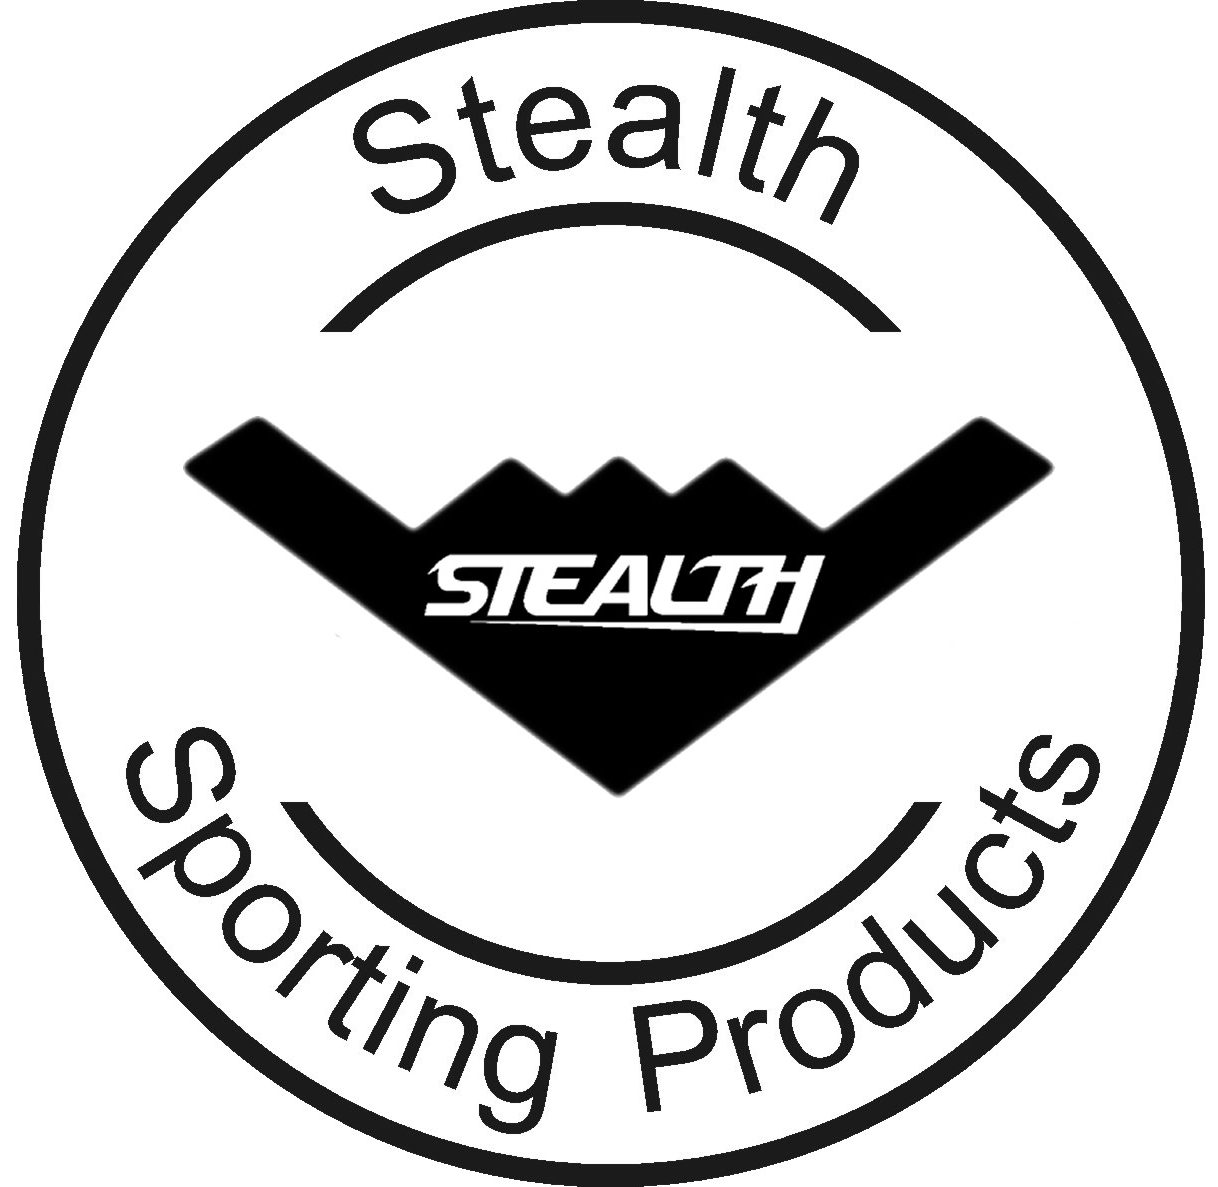 The home of Stealth Sporting Products in Iran